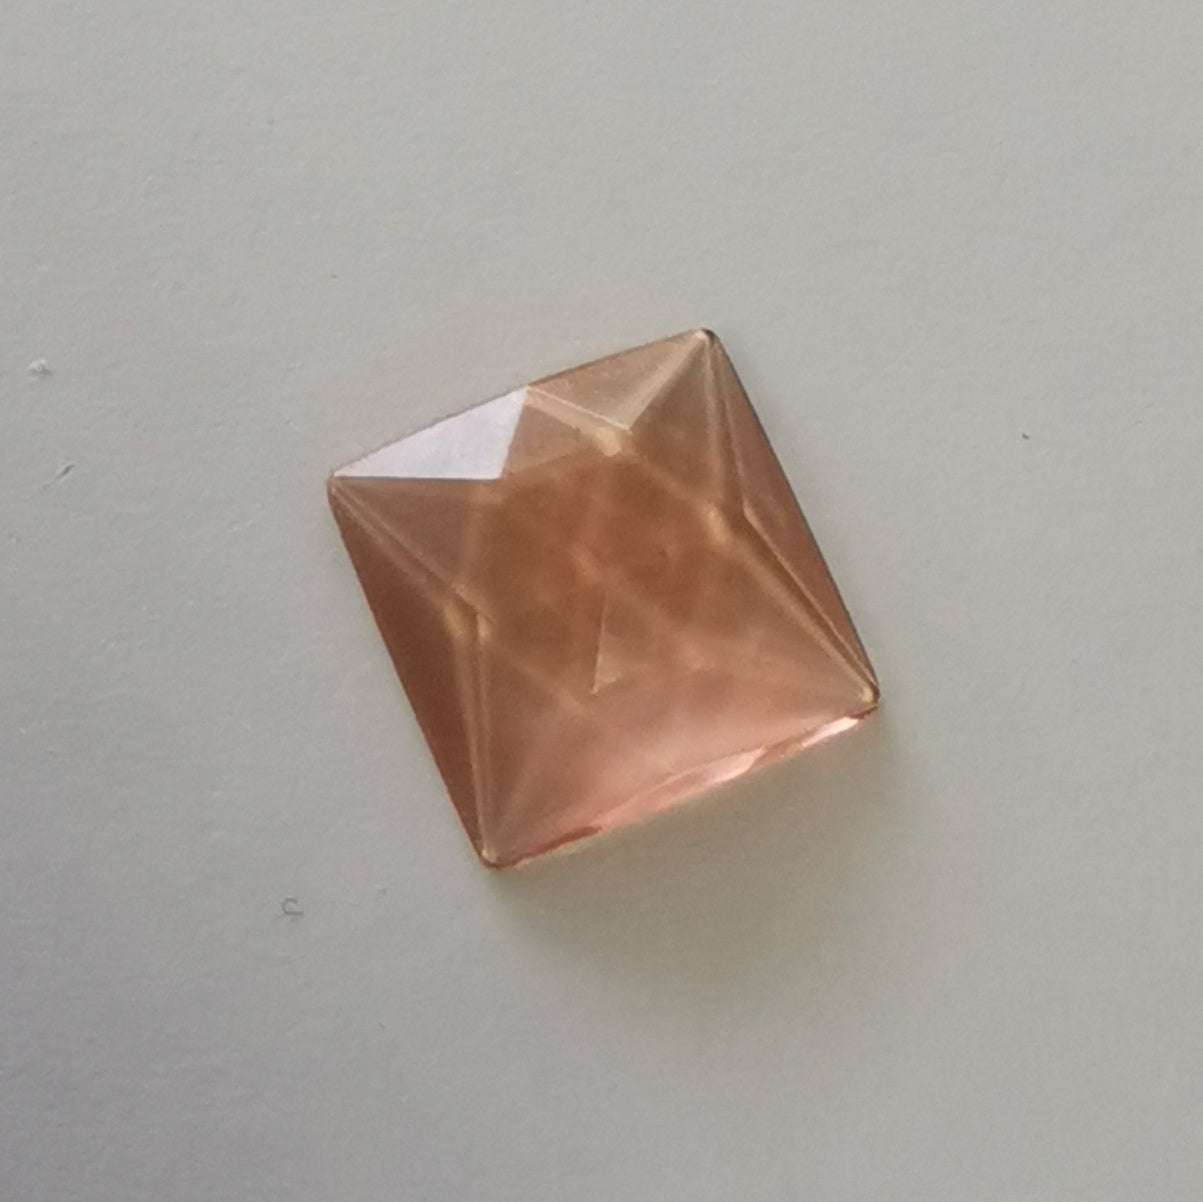 Peach Faceted Jewel *multiple options